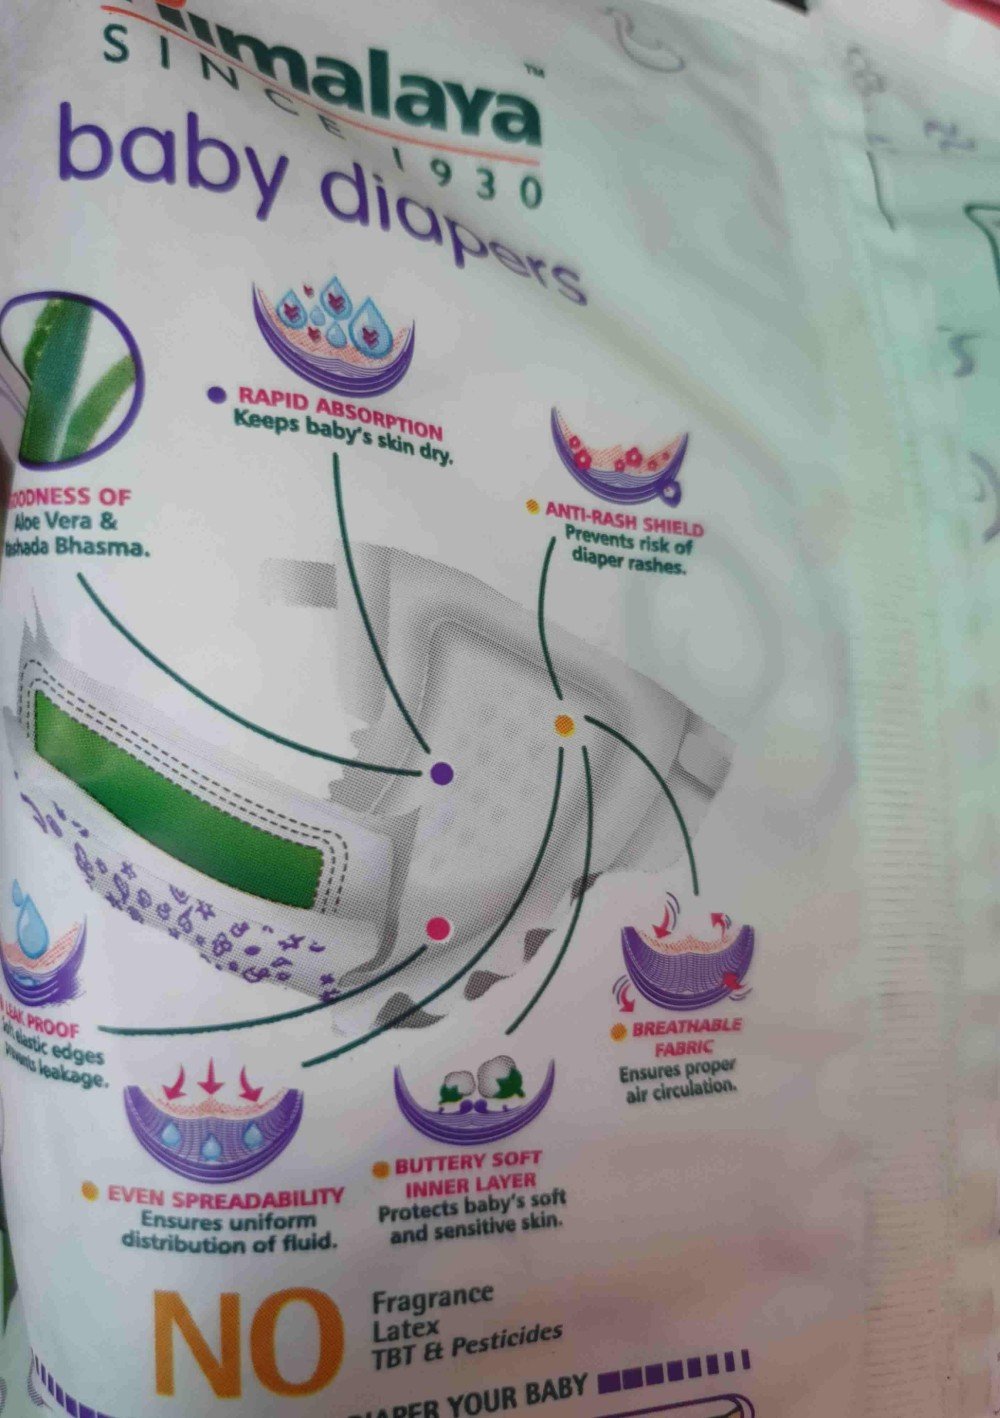 White Himalaya Baby Diapers Pants Mildness Tested For Baby Skin Weight   100G at Best Price in Bareilly  Arpit Associates